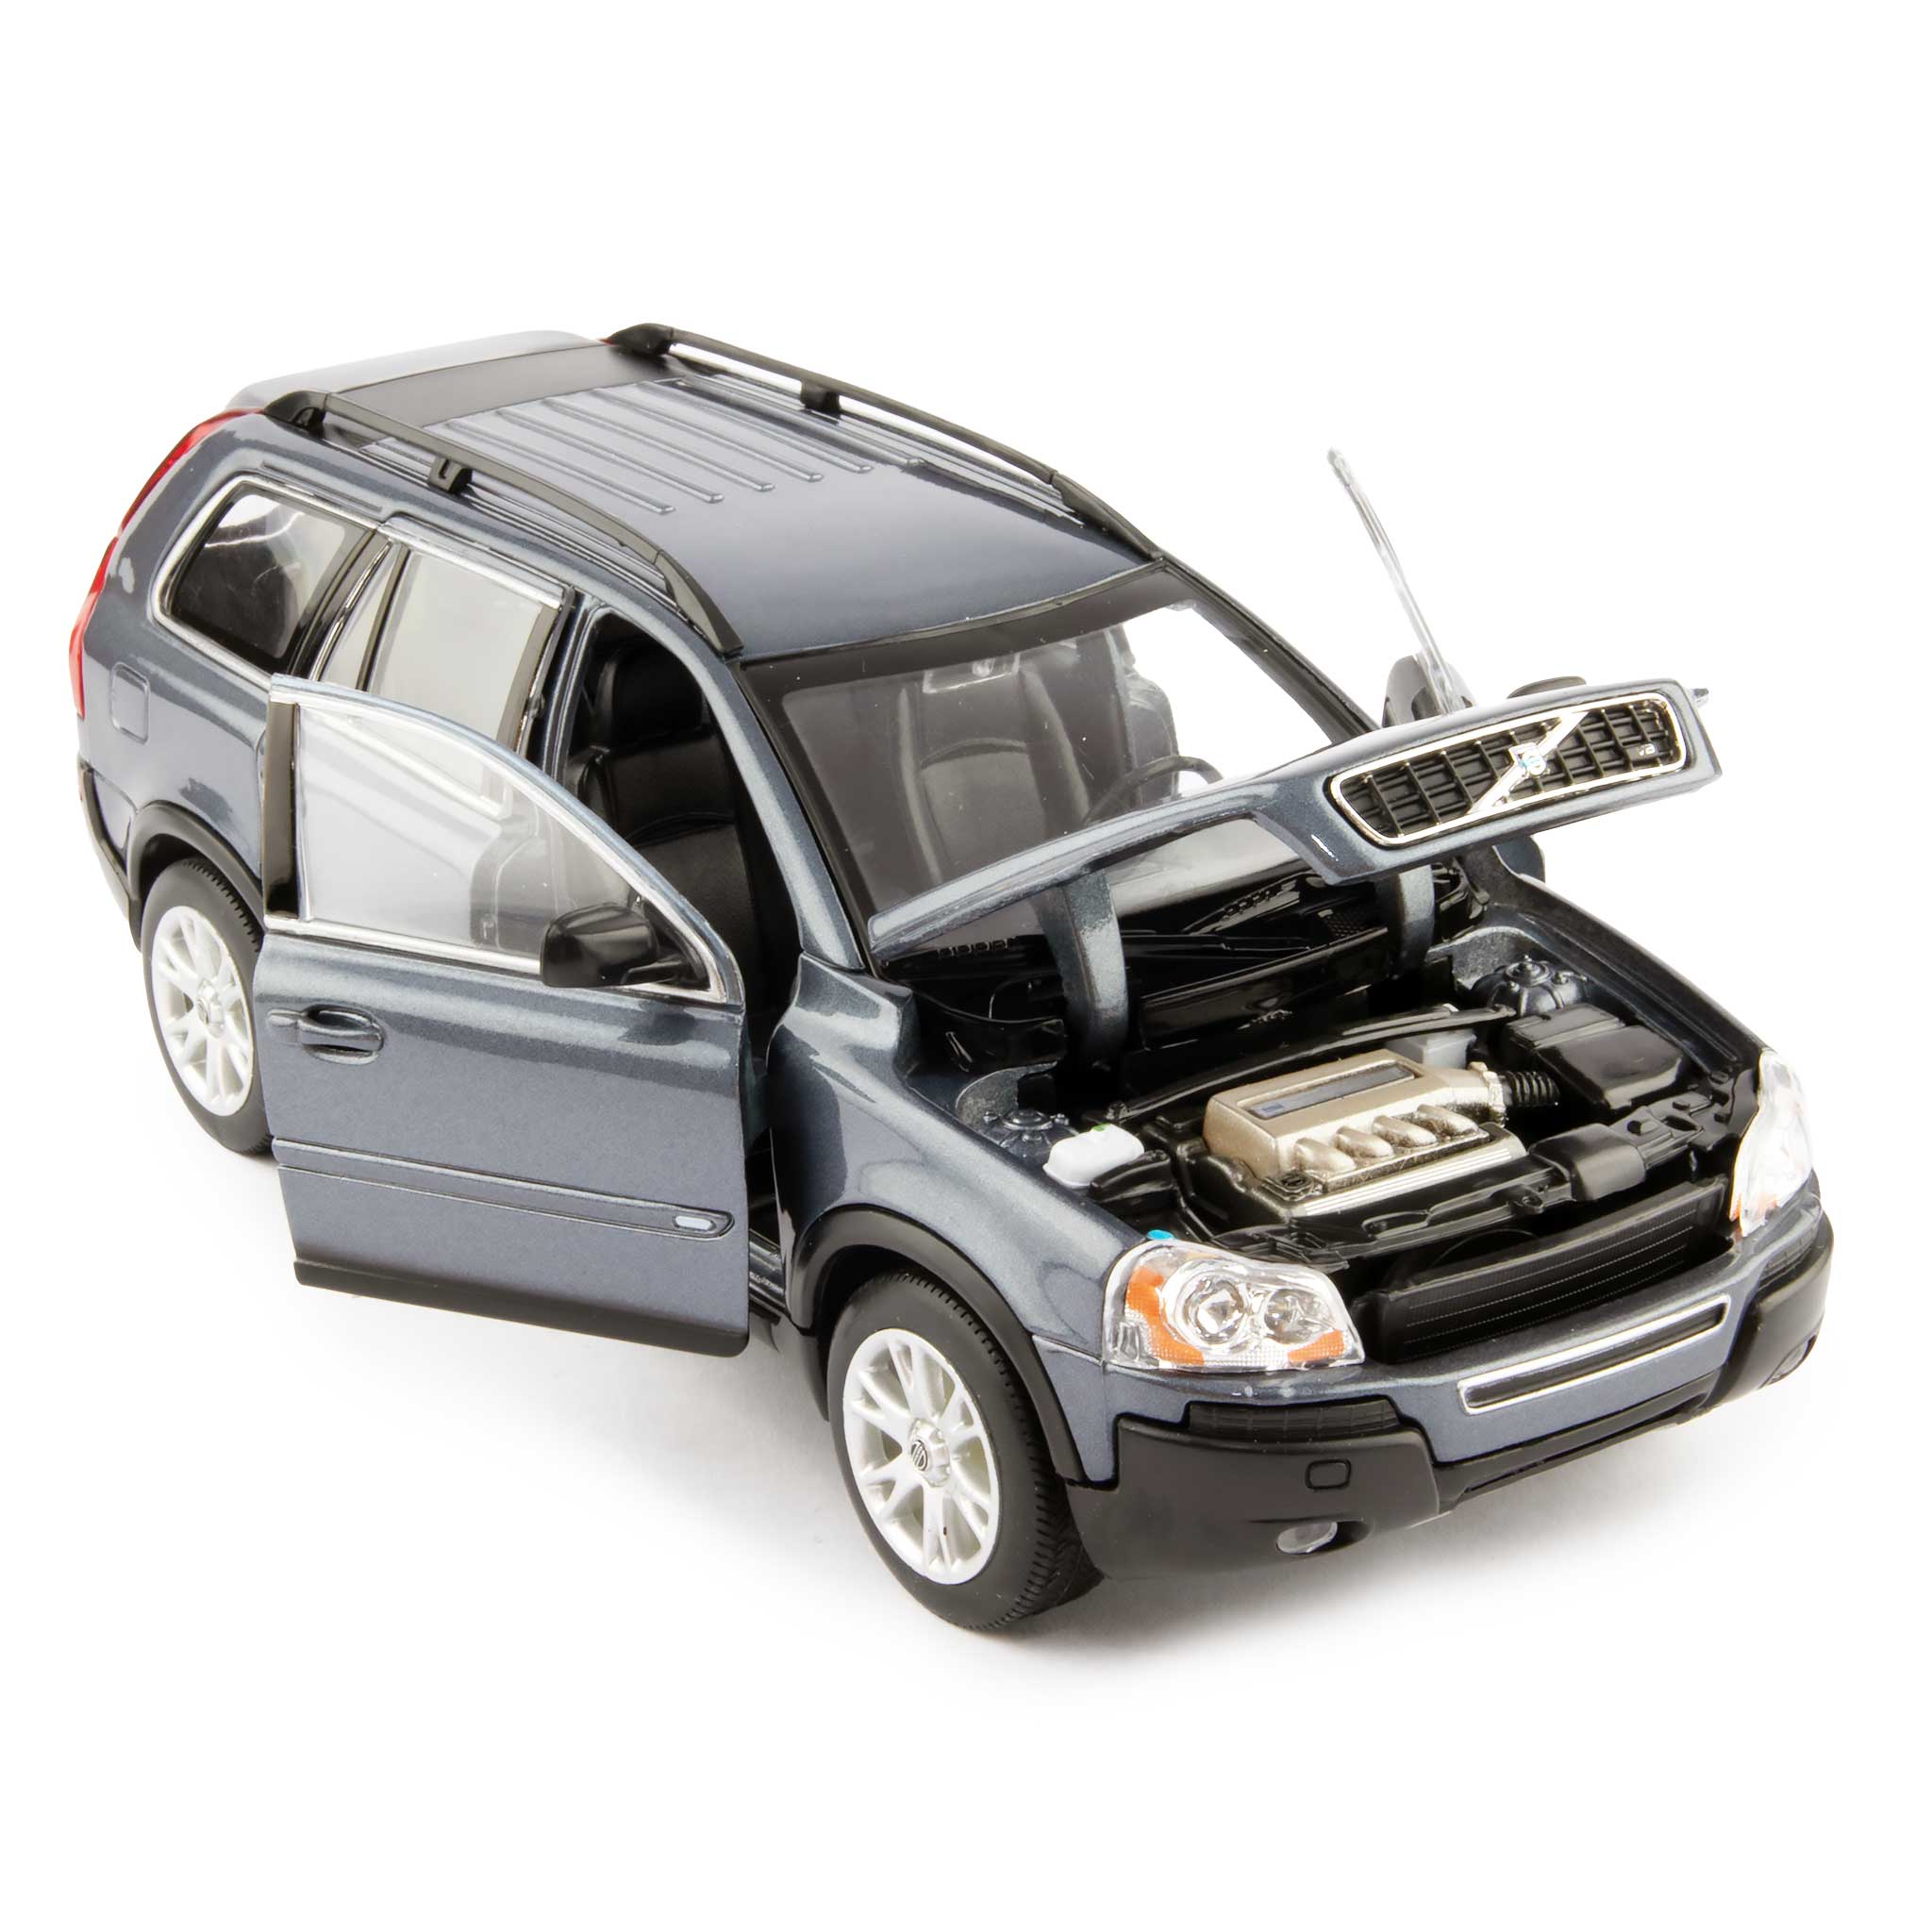 Volvo XC90 Diecast Model Car grey - 1:24 Scale-Welly-Diecast Model Centre